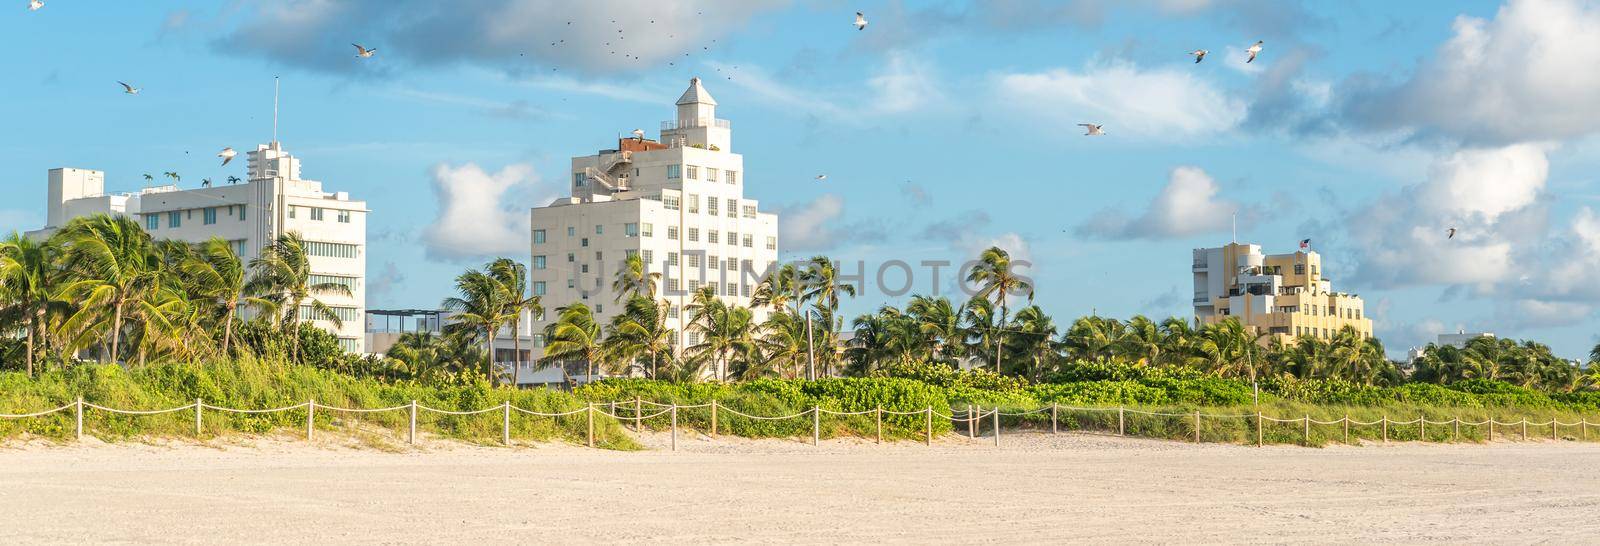 Panorama of Art deco district of South Beach Miami. The buildings are surrounded by tropical palm trees. by Mariakray